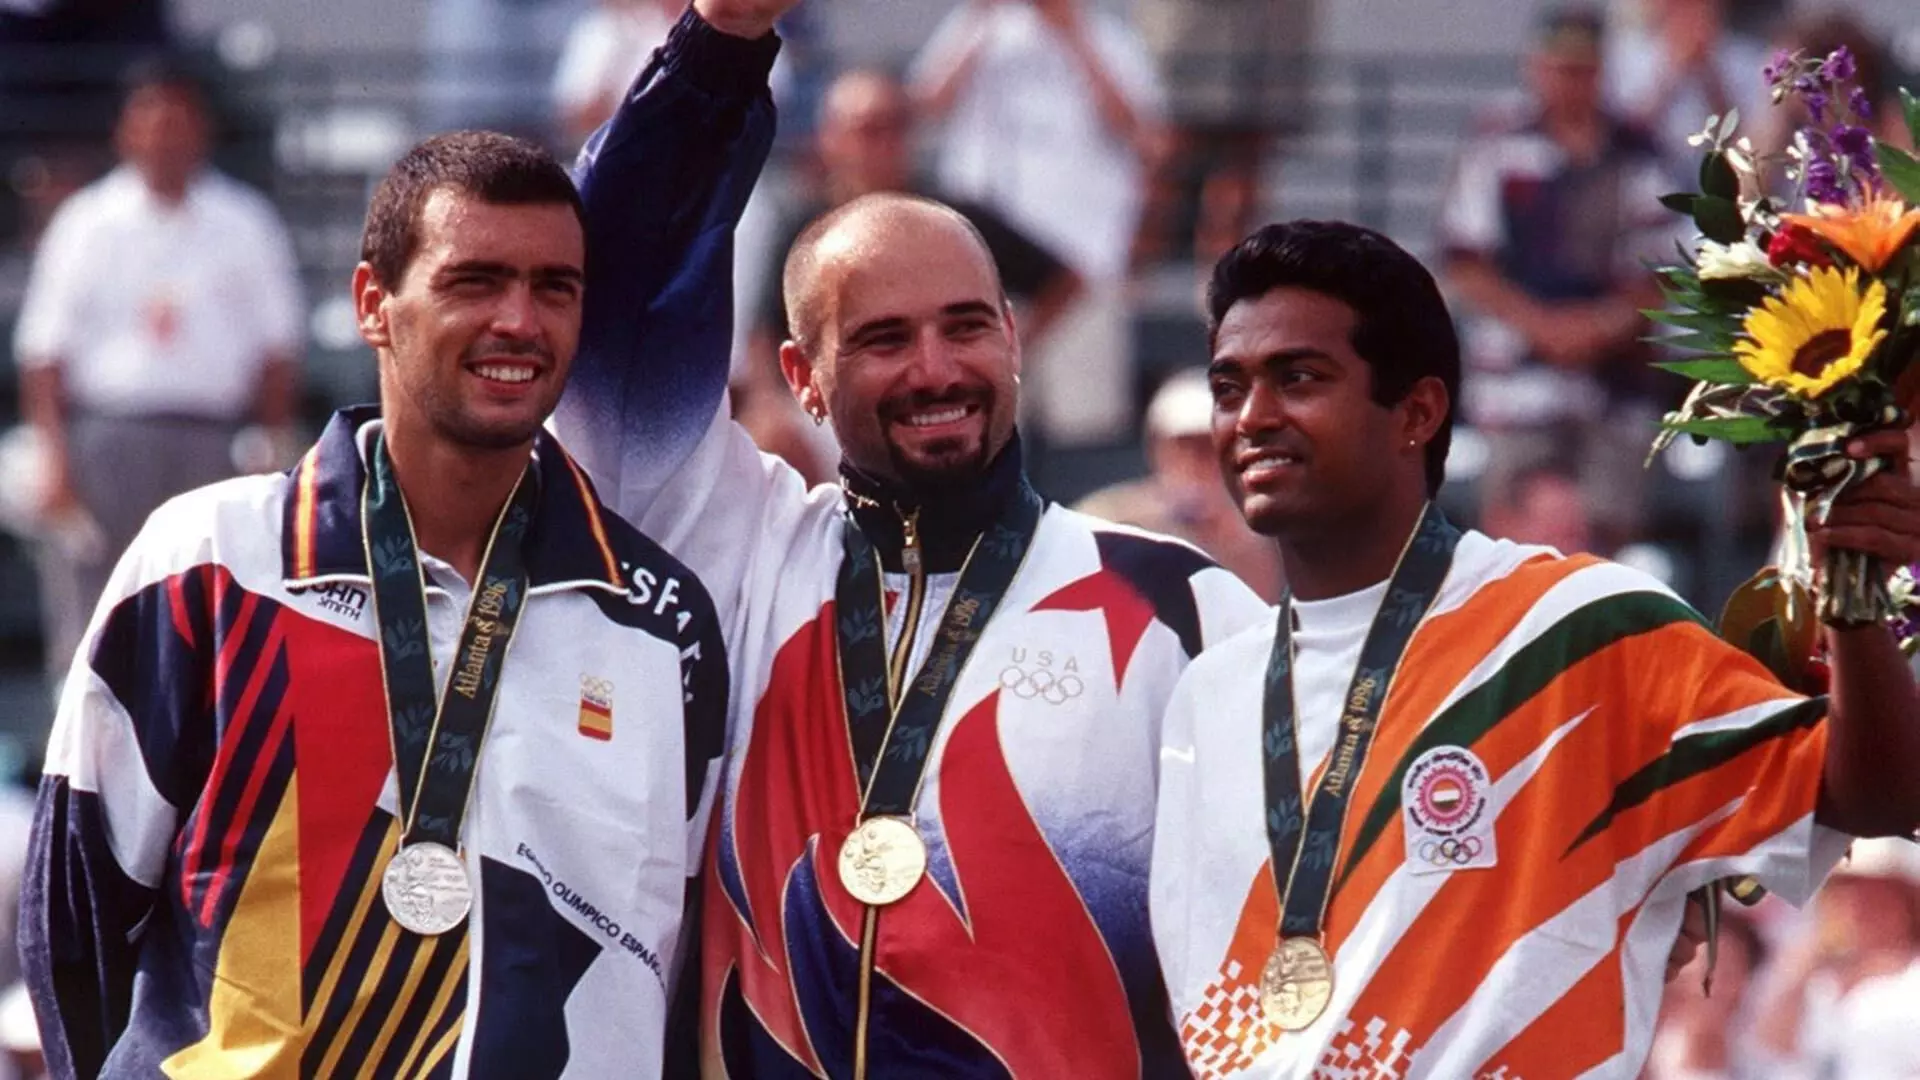 Leander Paes won Indias first Olympics individual medal in 44 years [Source: Olympics]